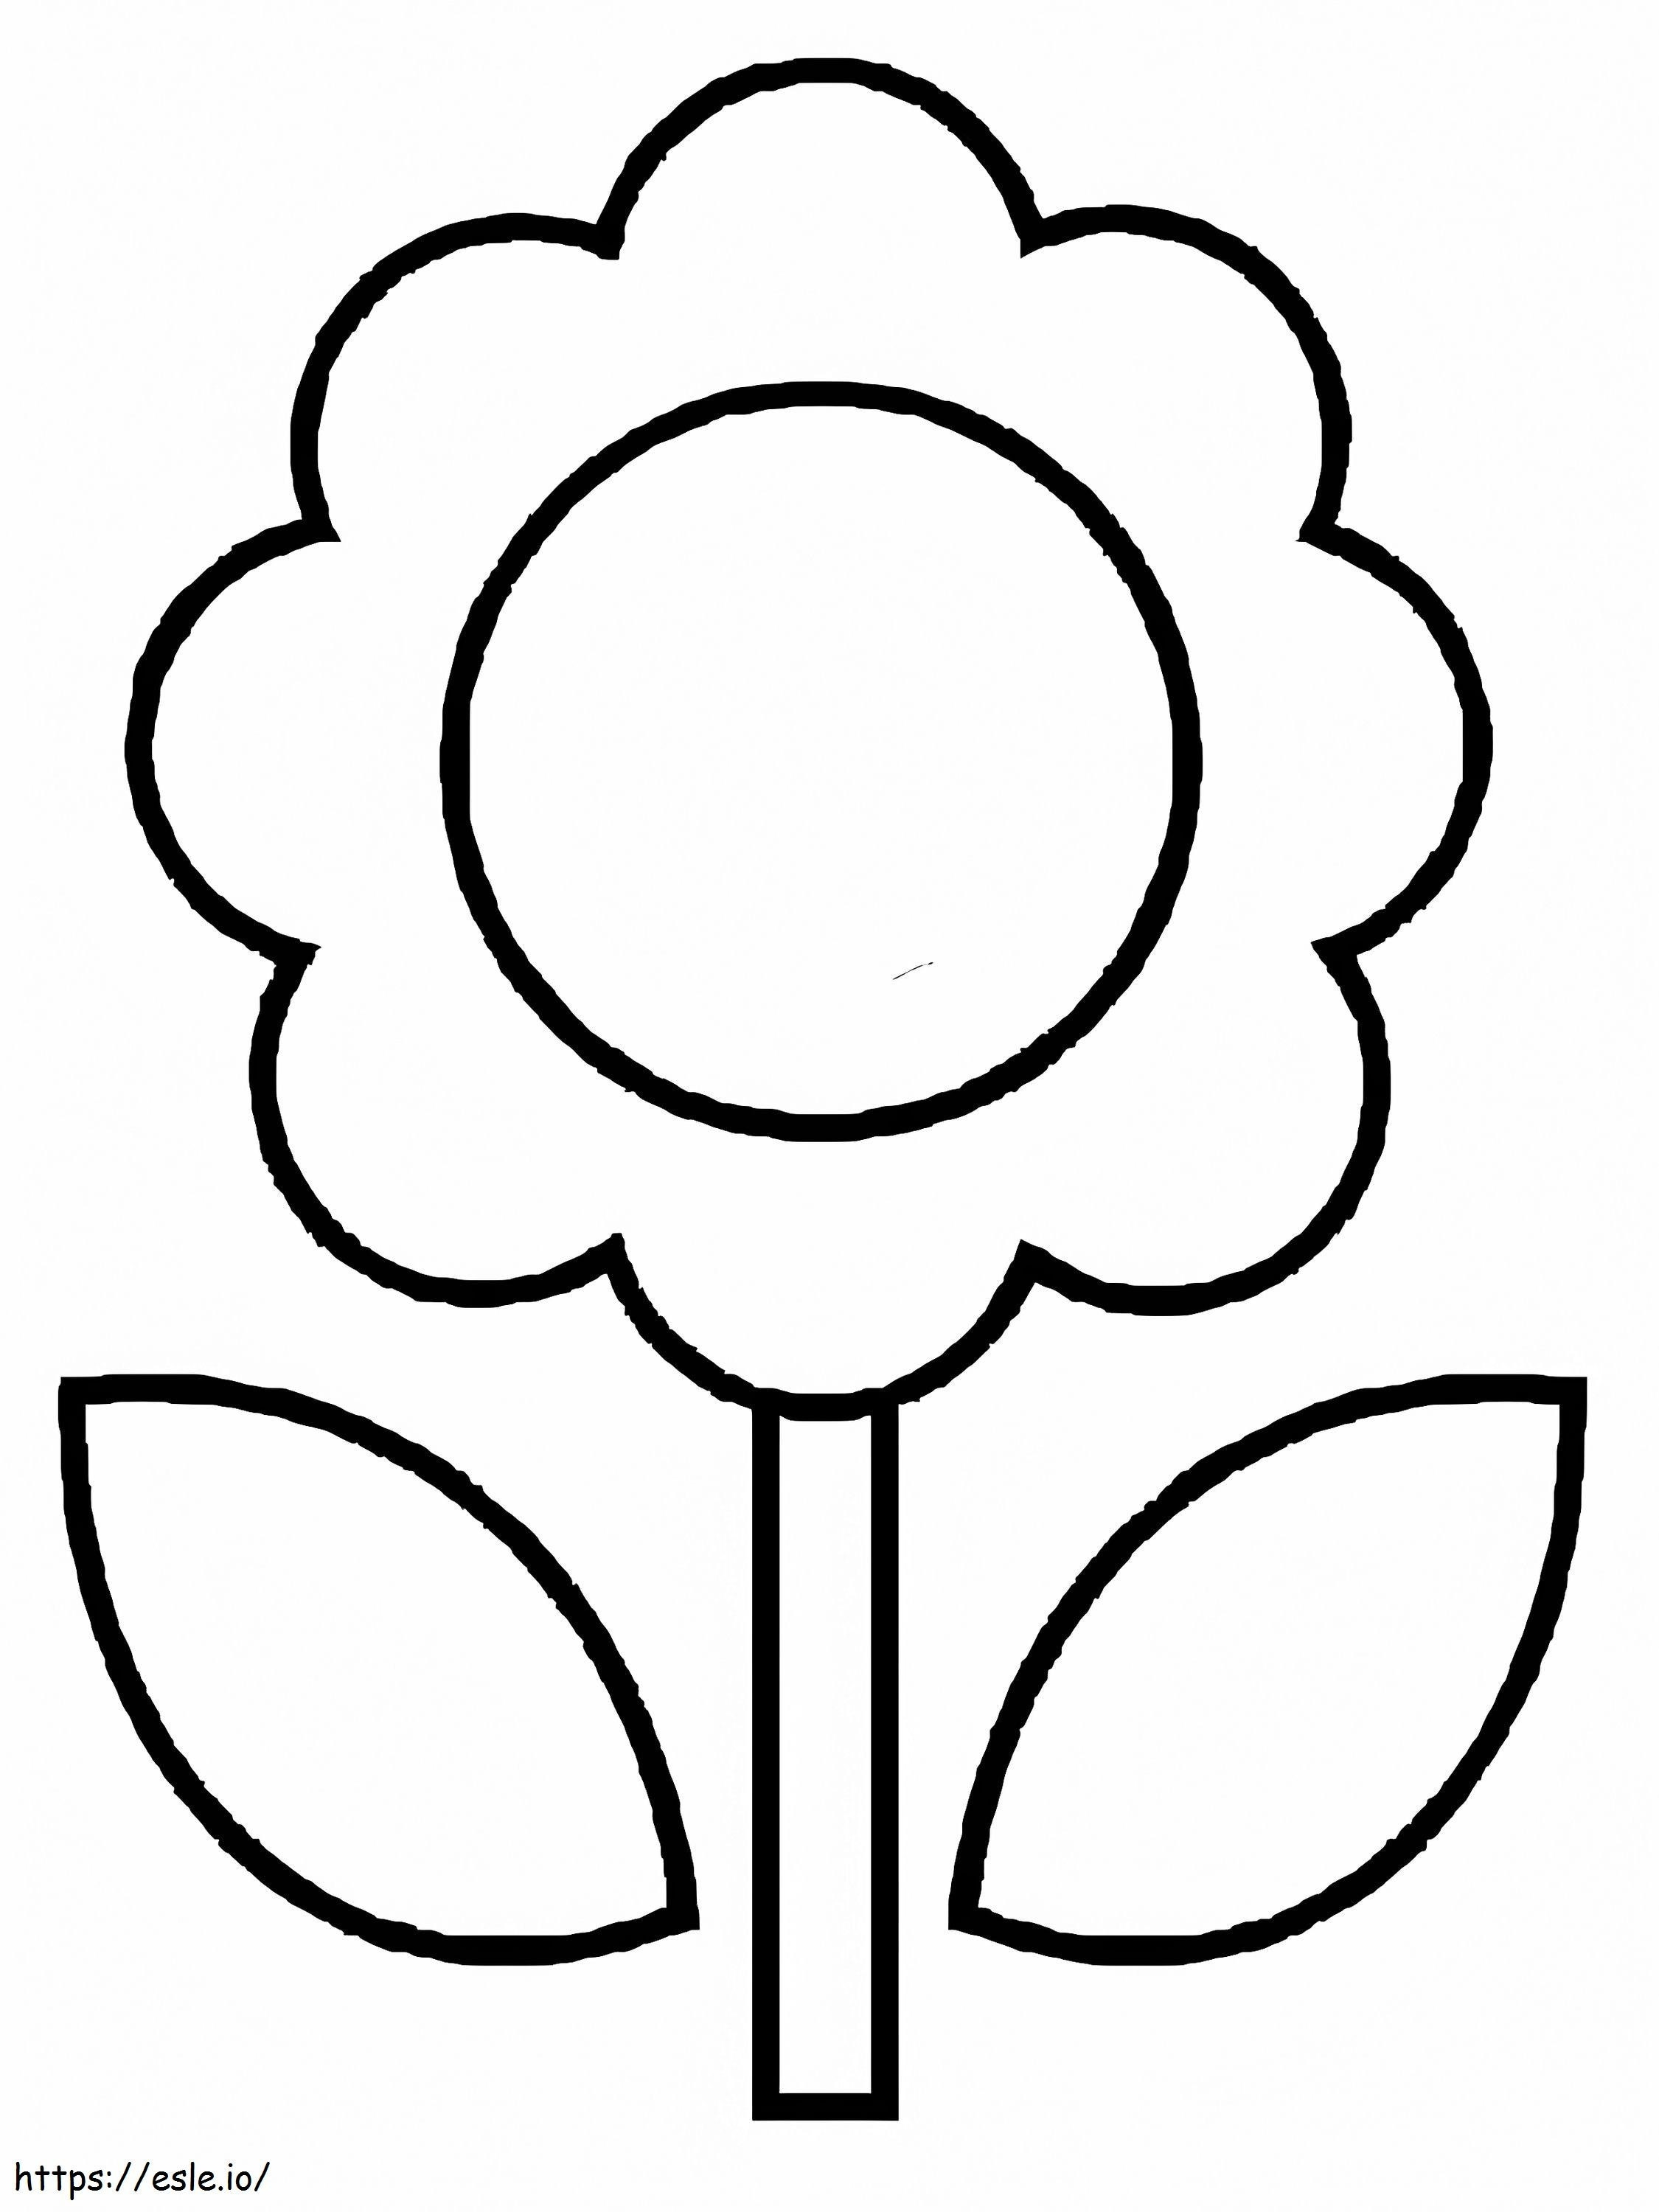 Free Simple Flower coloring page